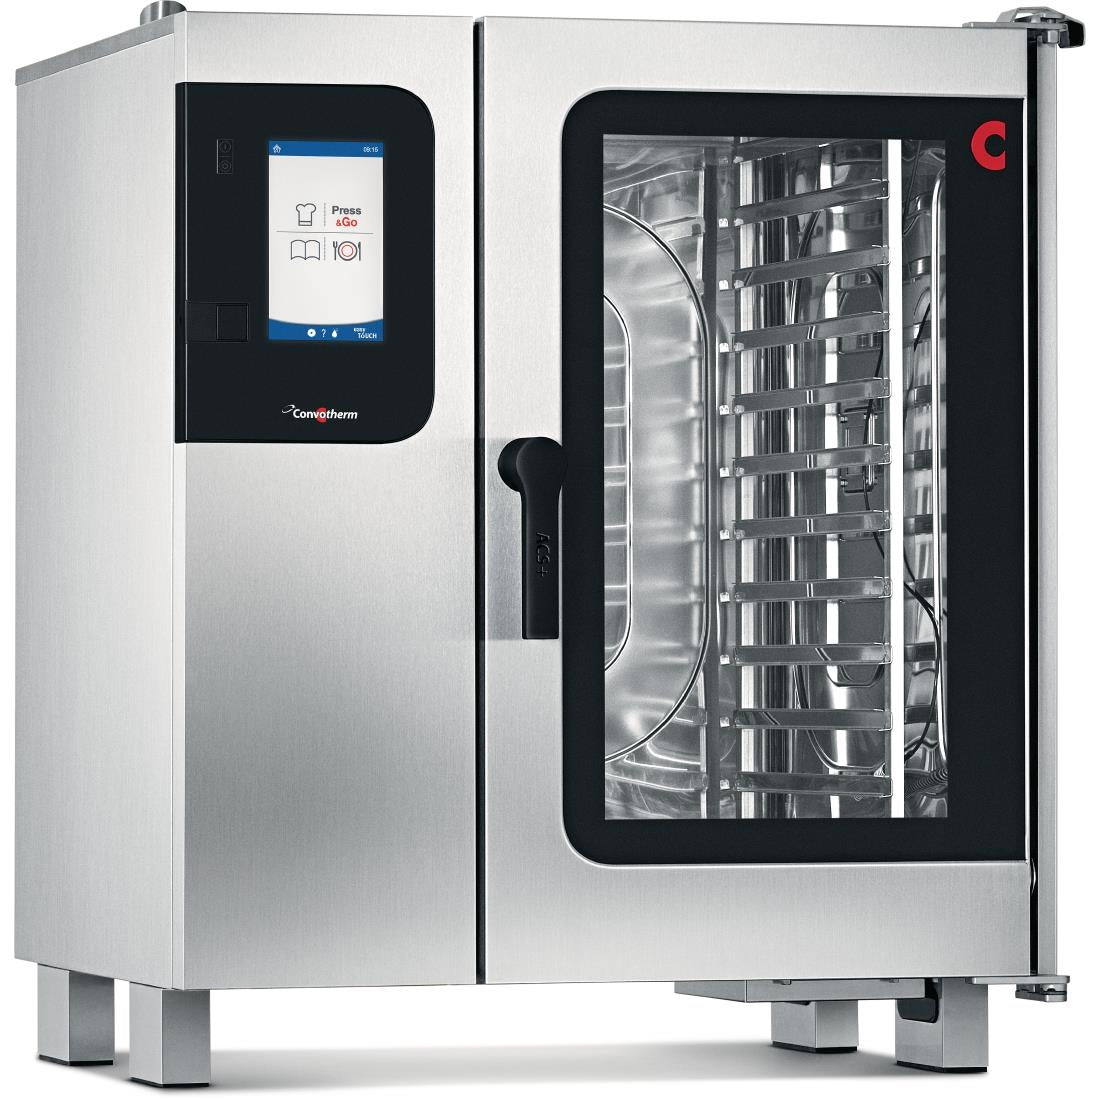 Convotherm 4 easyTouch Combi Oven 10 x 1 x1 GN Grid with Smoker and Install